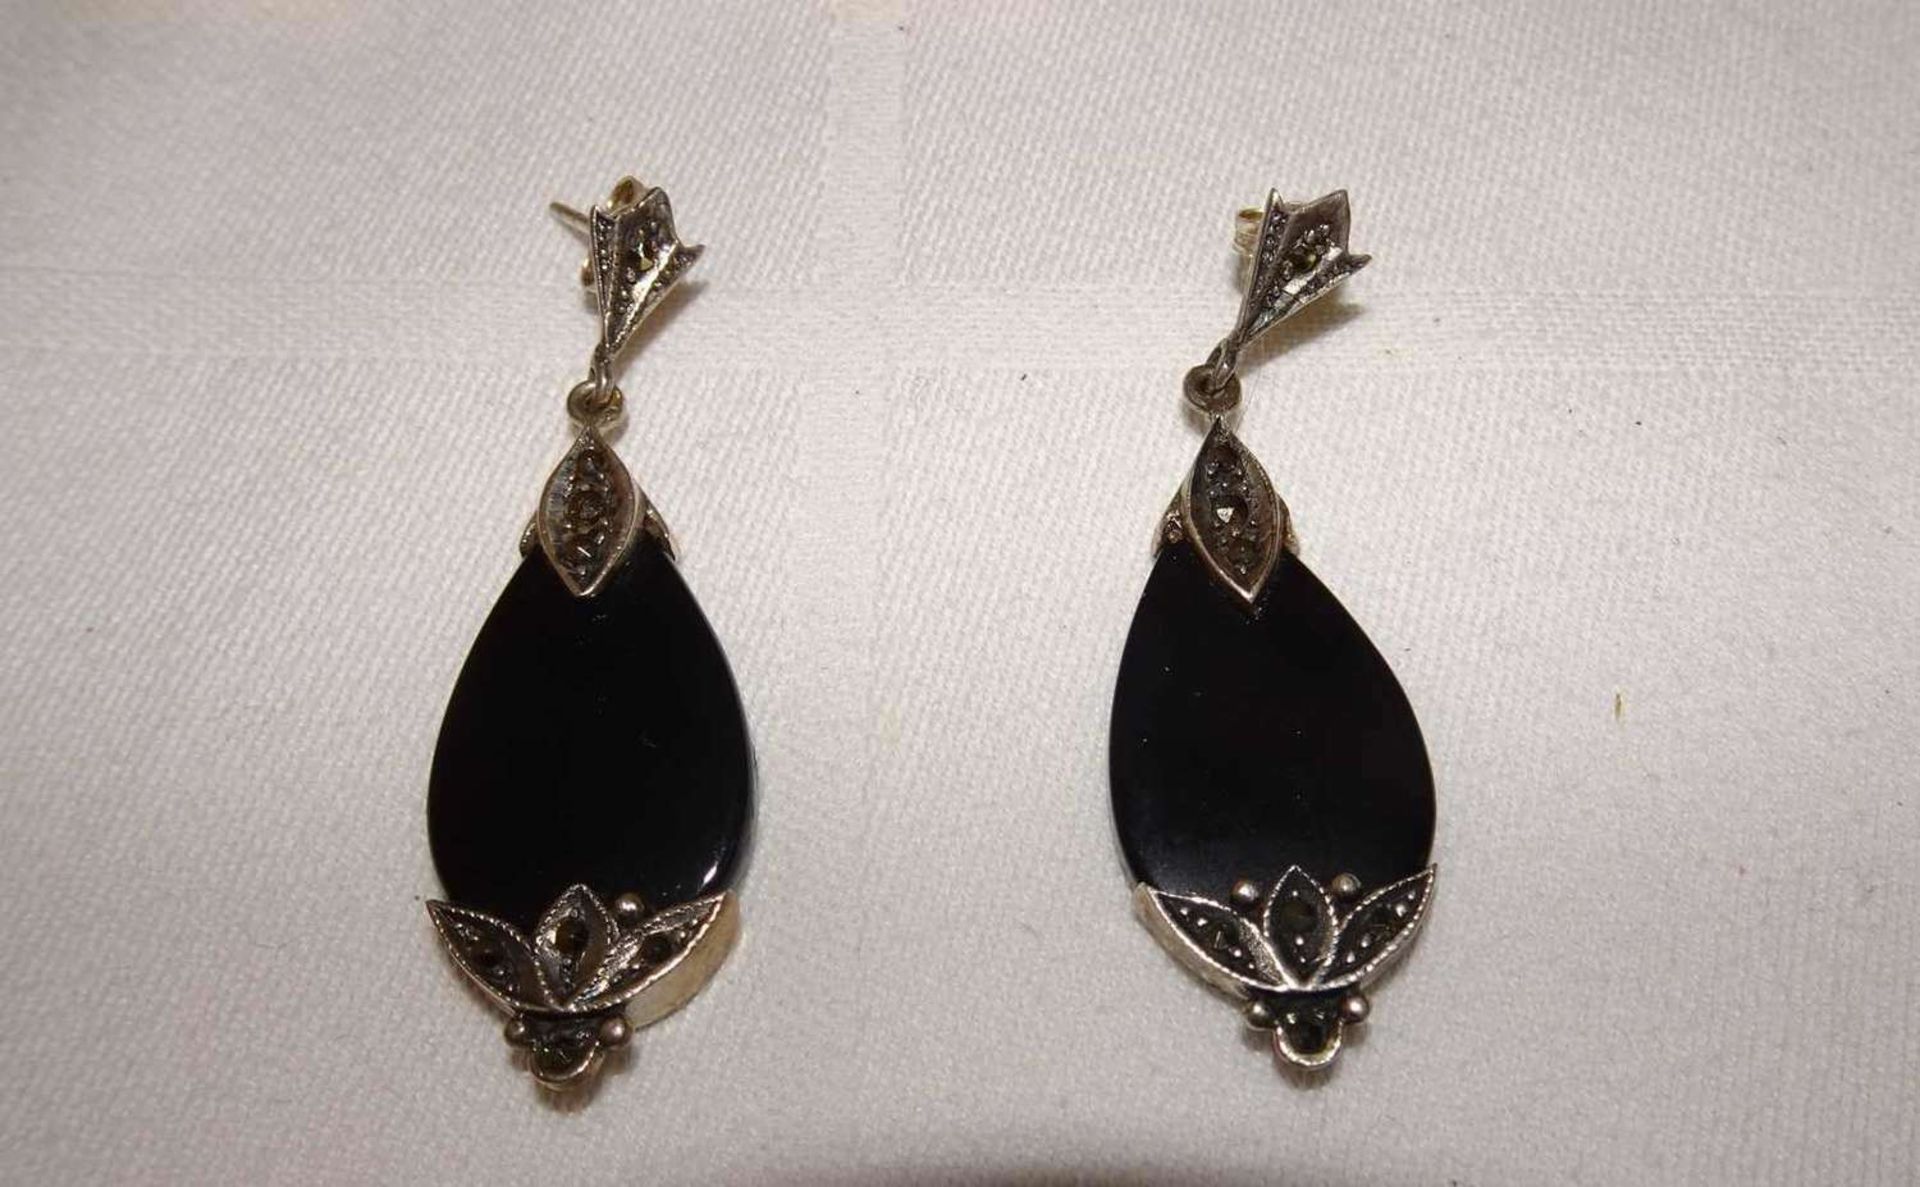 Ohrringe, Jugendstil, Silber, mit Onyx und Markasiten. Earrings, Art Nouveau, silver, with onyx and